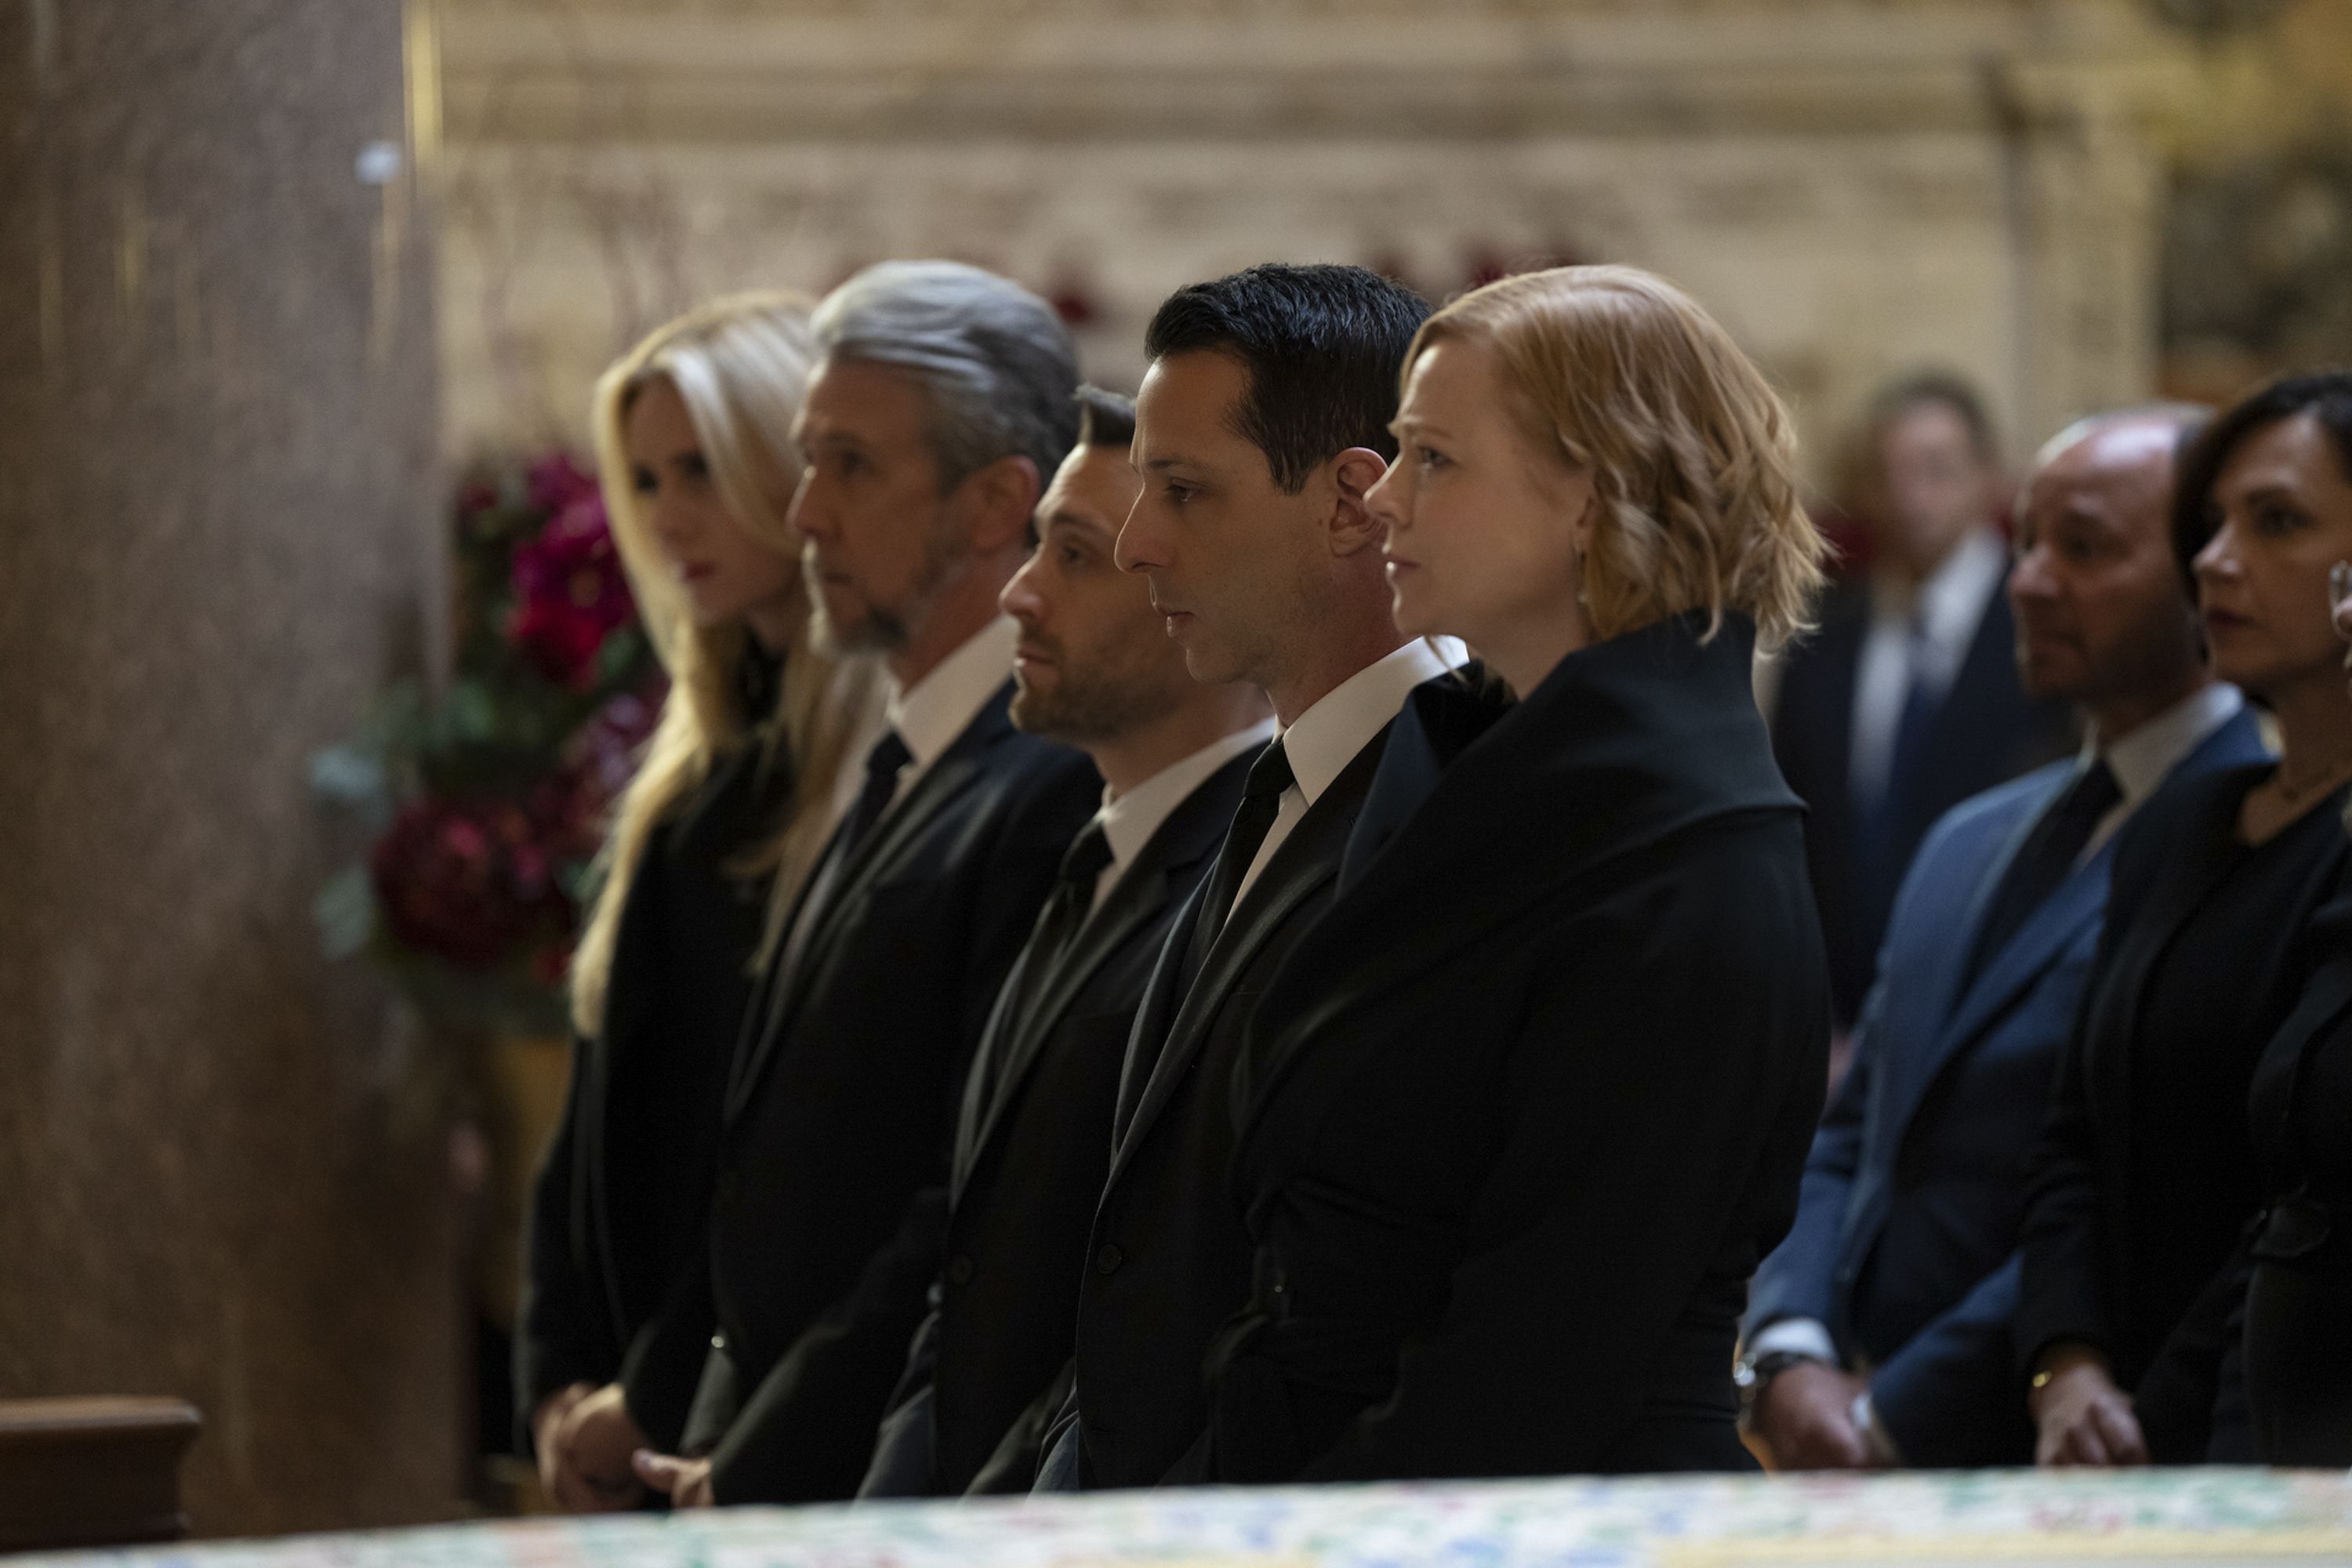 The Roys navigate the optics of mourning in the final season's penultimate episode.